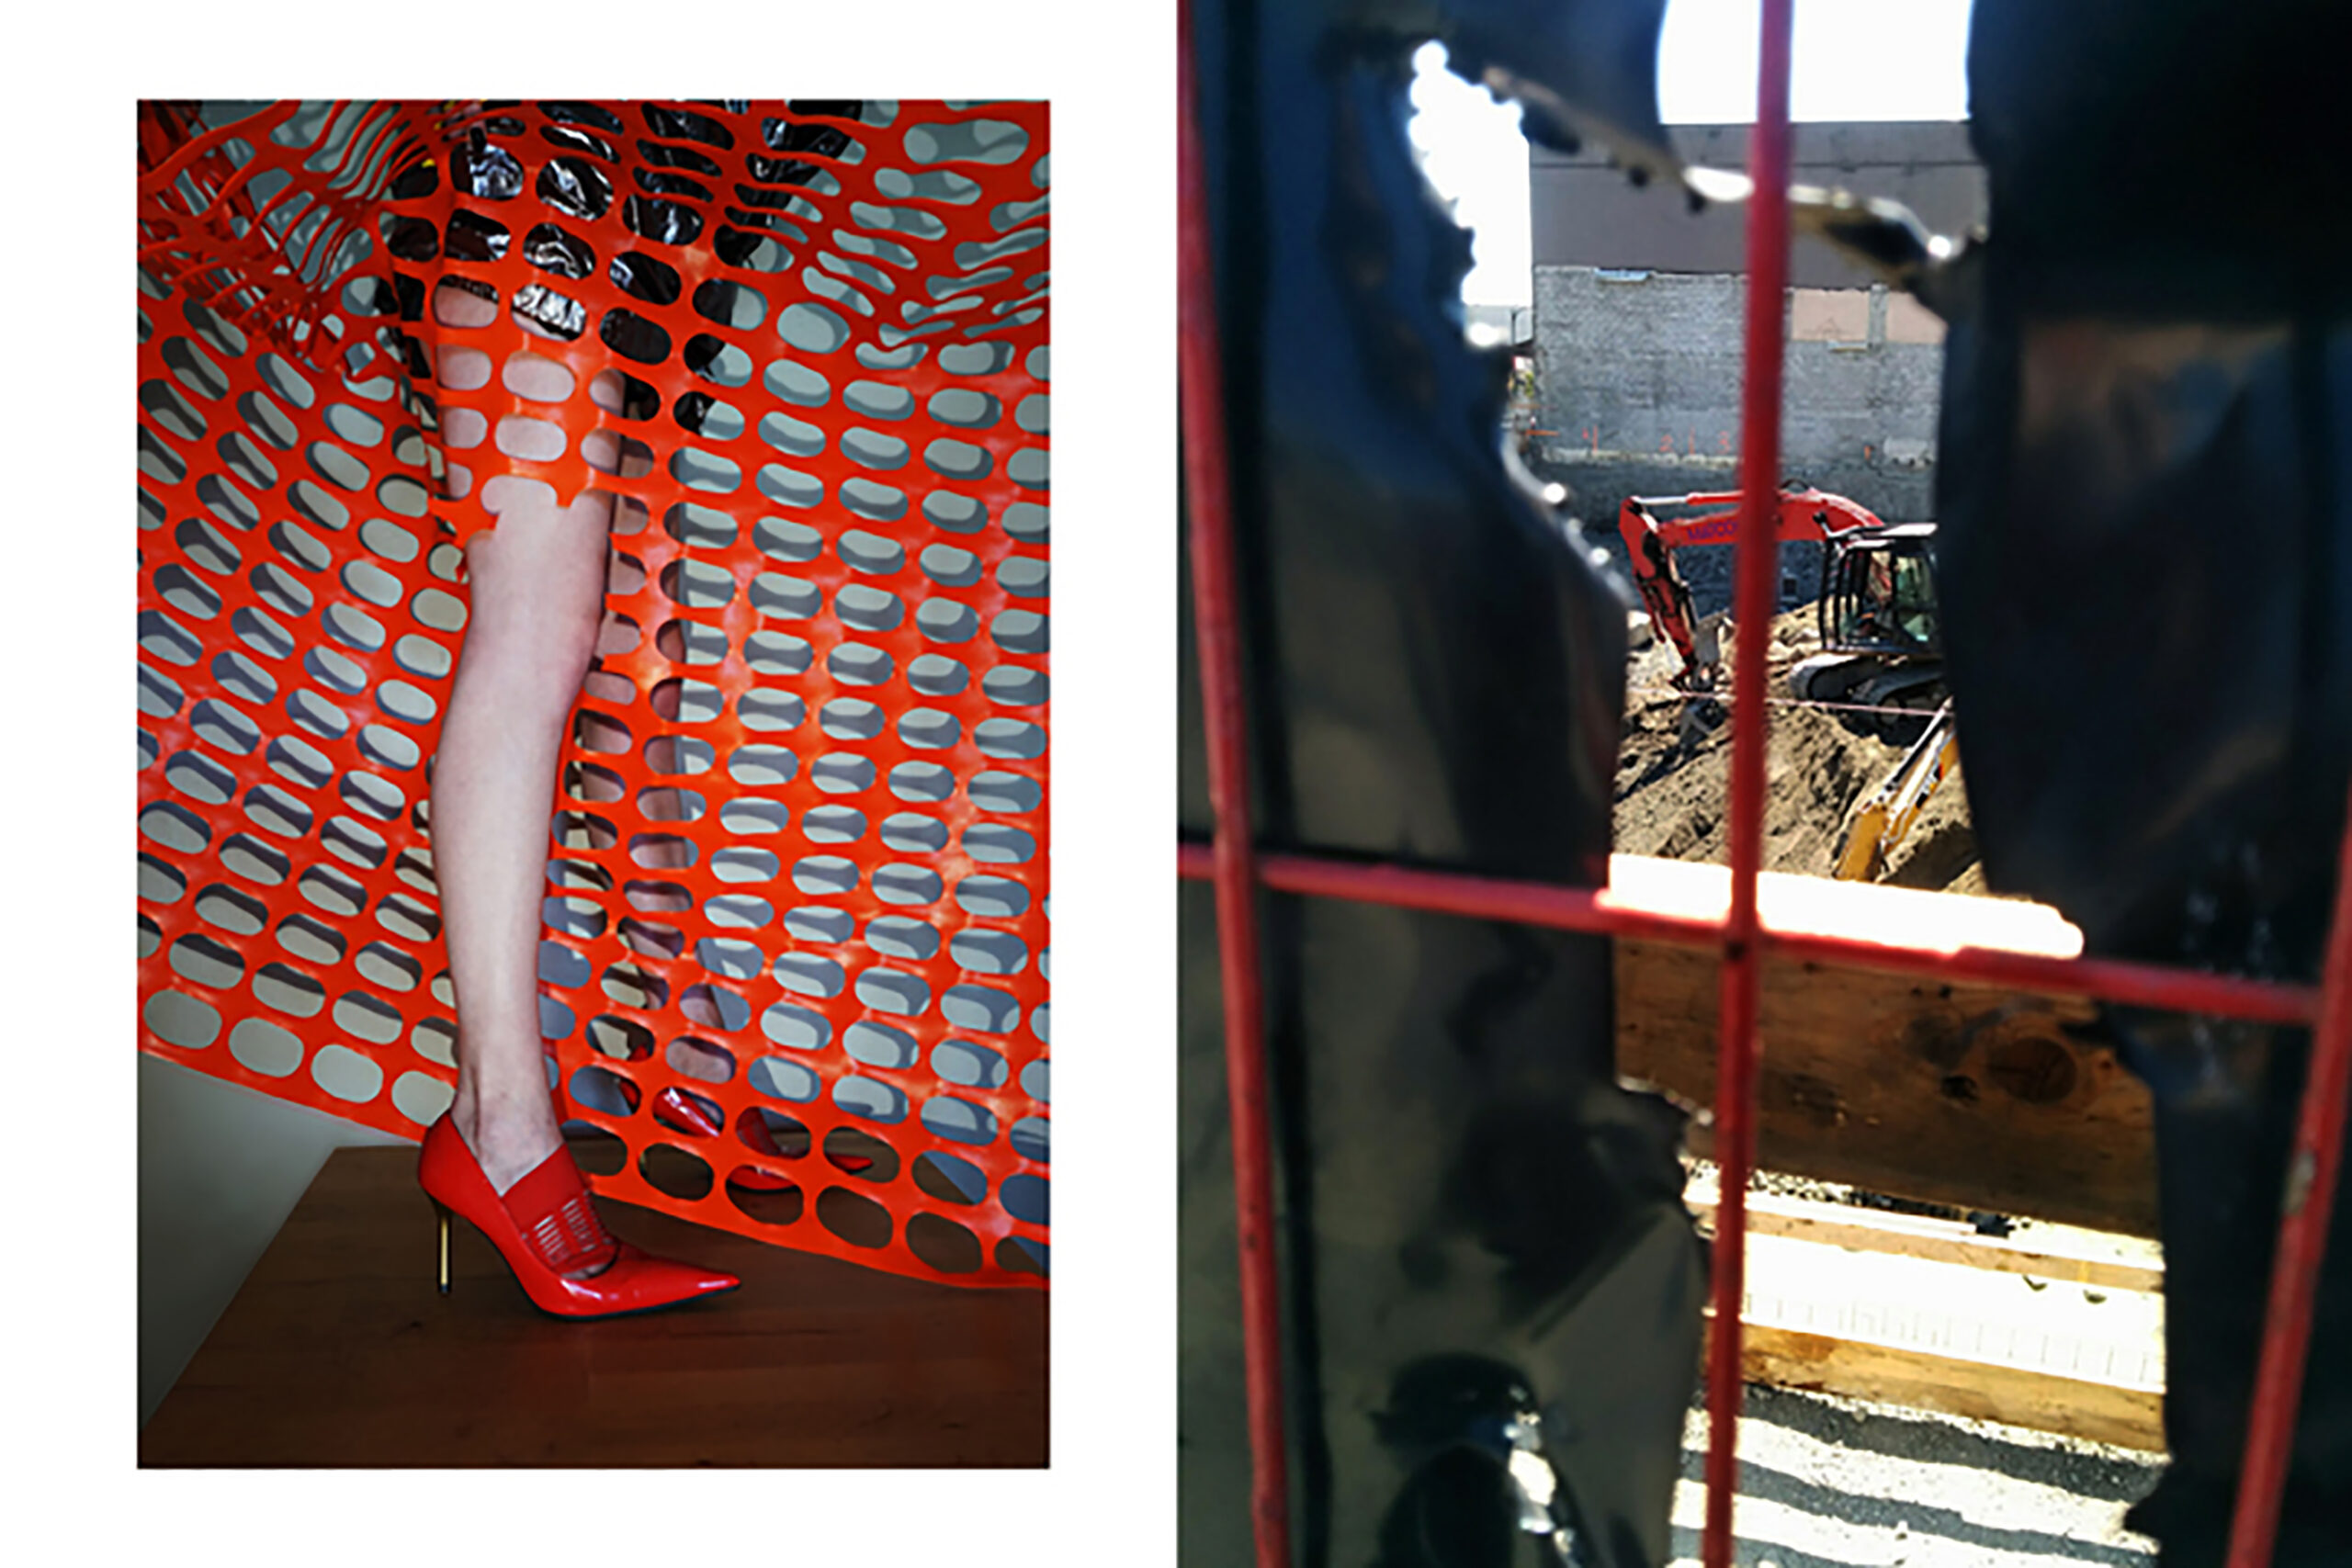 comparing construction and fashion; Orange netting with a red stiletto and fish net sock to a orange fence near a construction space